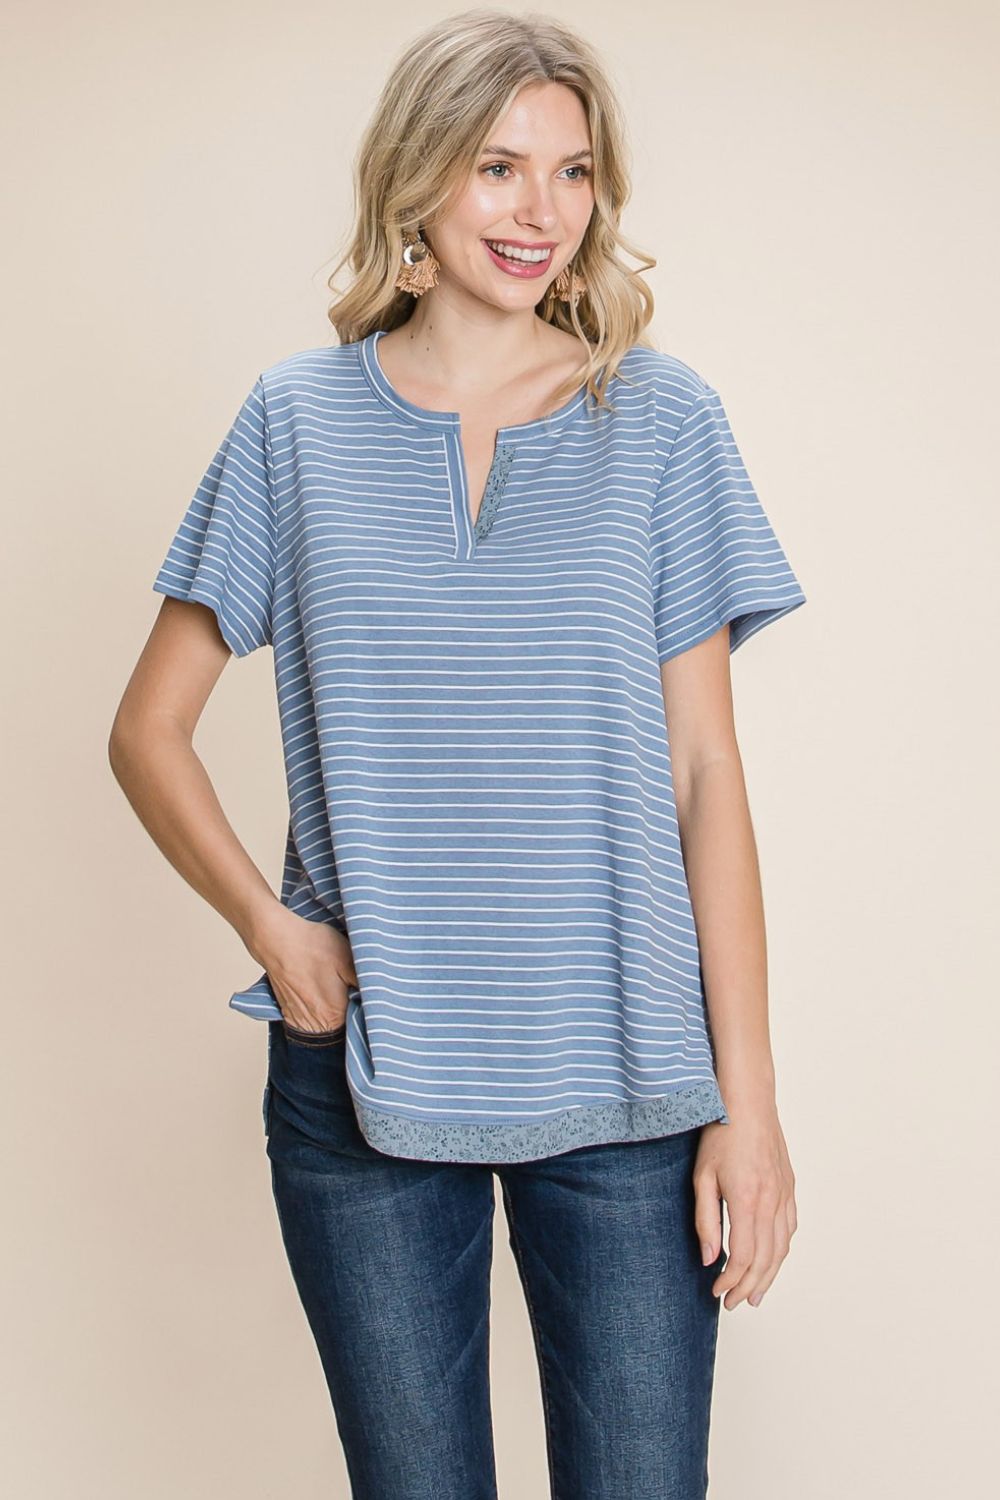 Cotton Bleu by Nu Lab Slit Striped Notched Short Sleeve T-Shirt - Three Bears Boutique